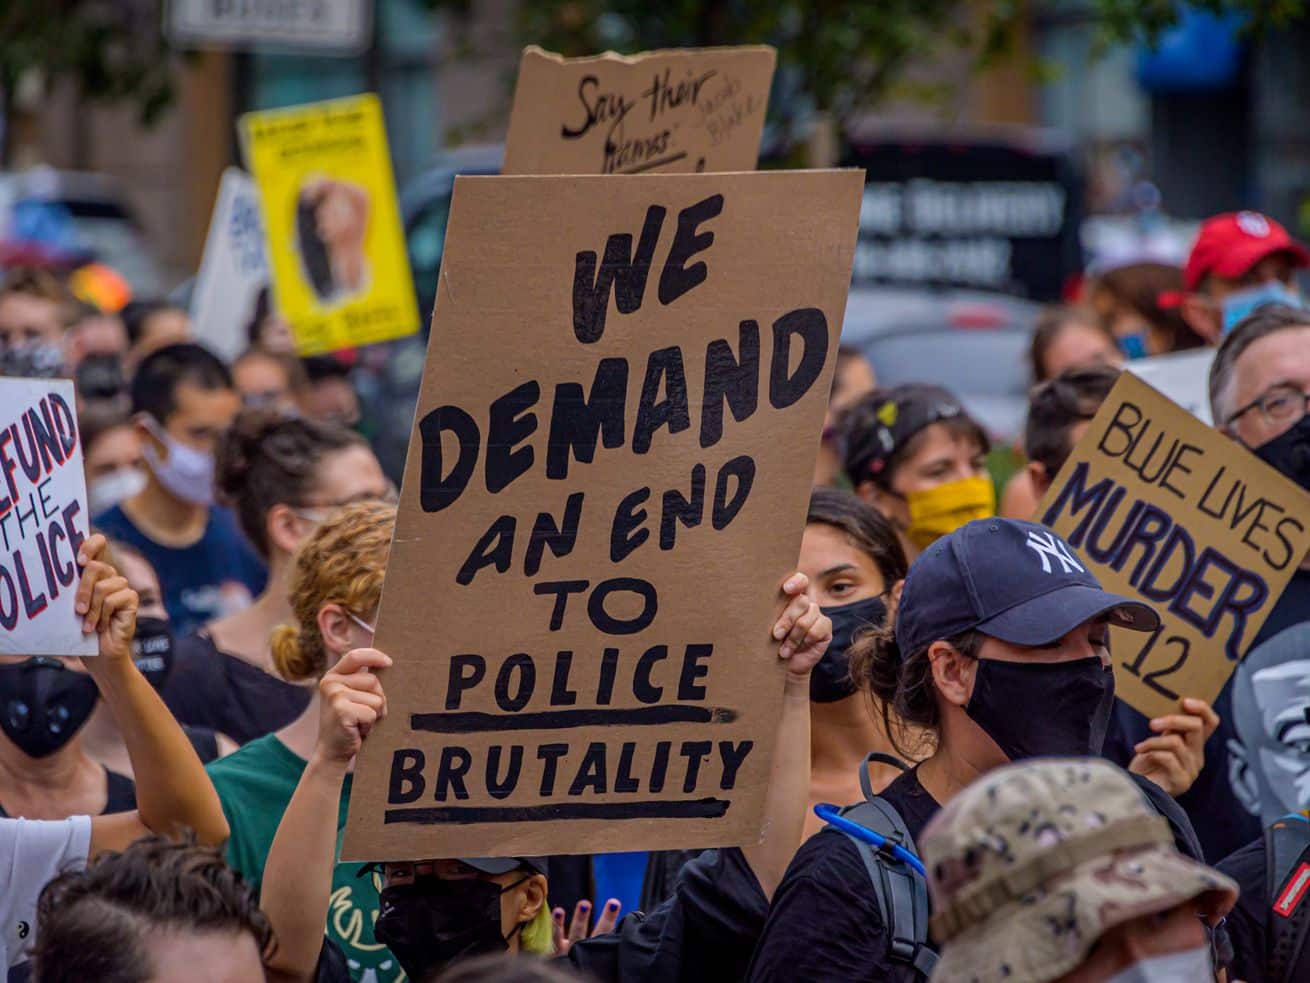 A majority of voters see an urgent need for police reform following the Chauvin verdict